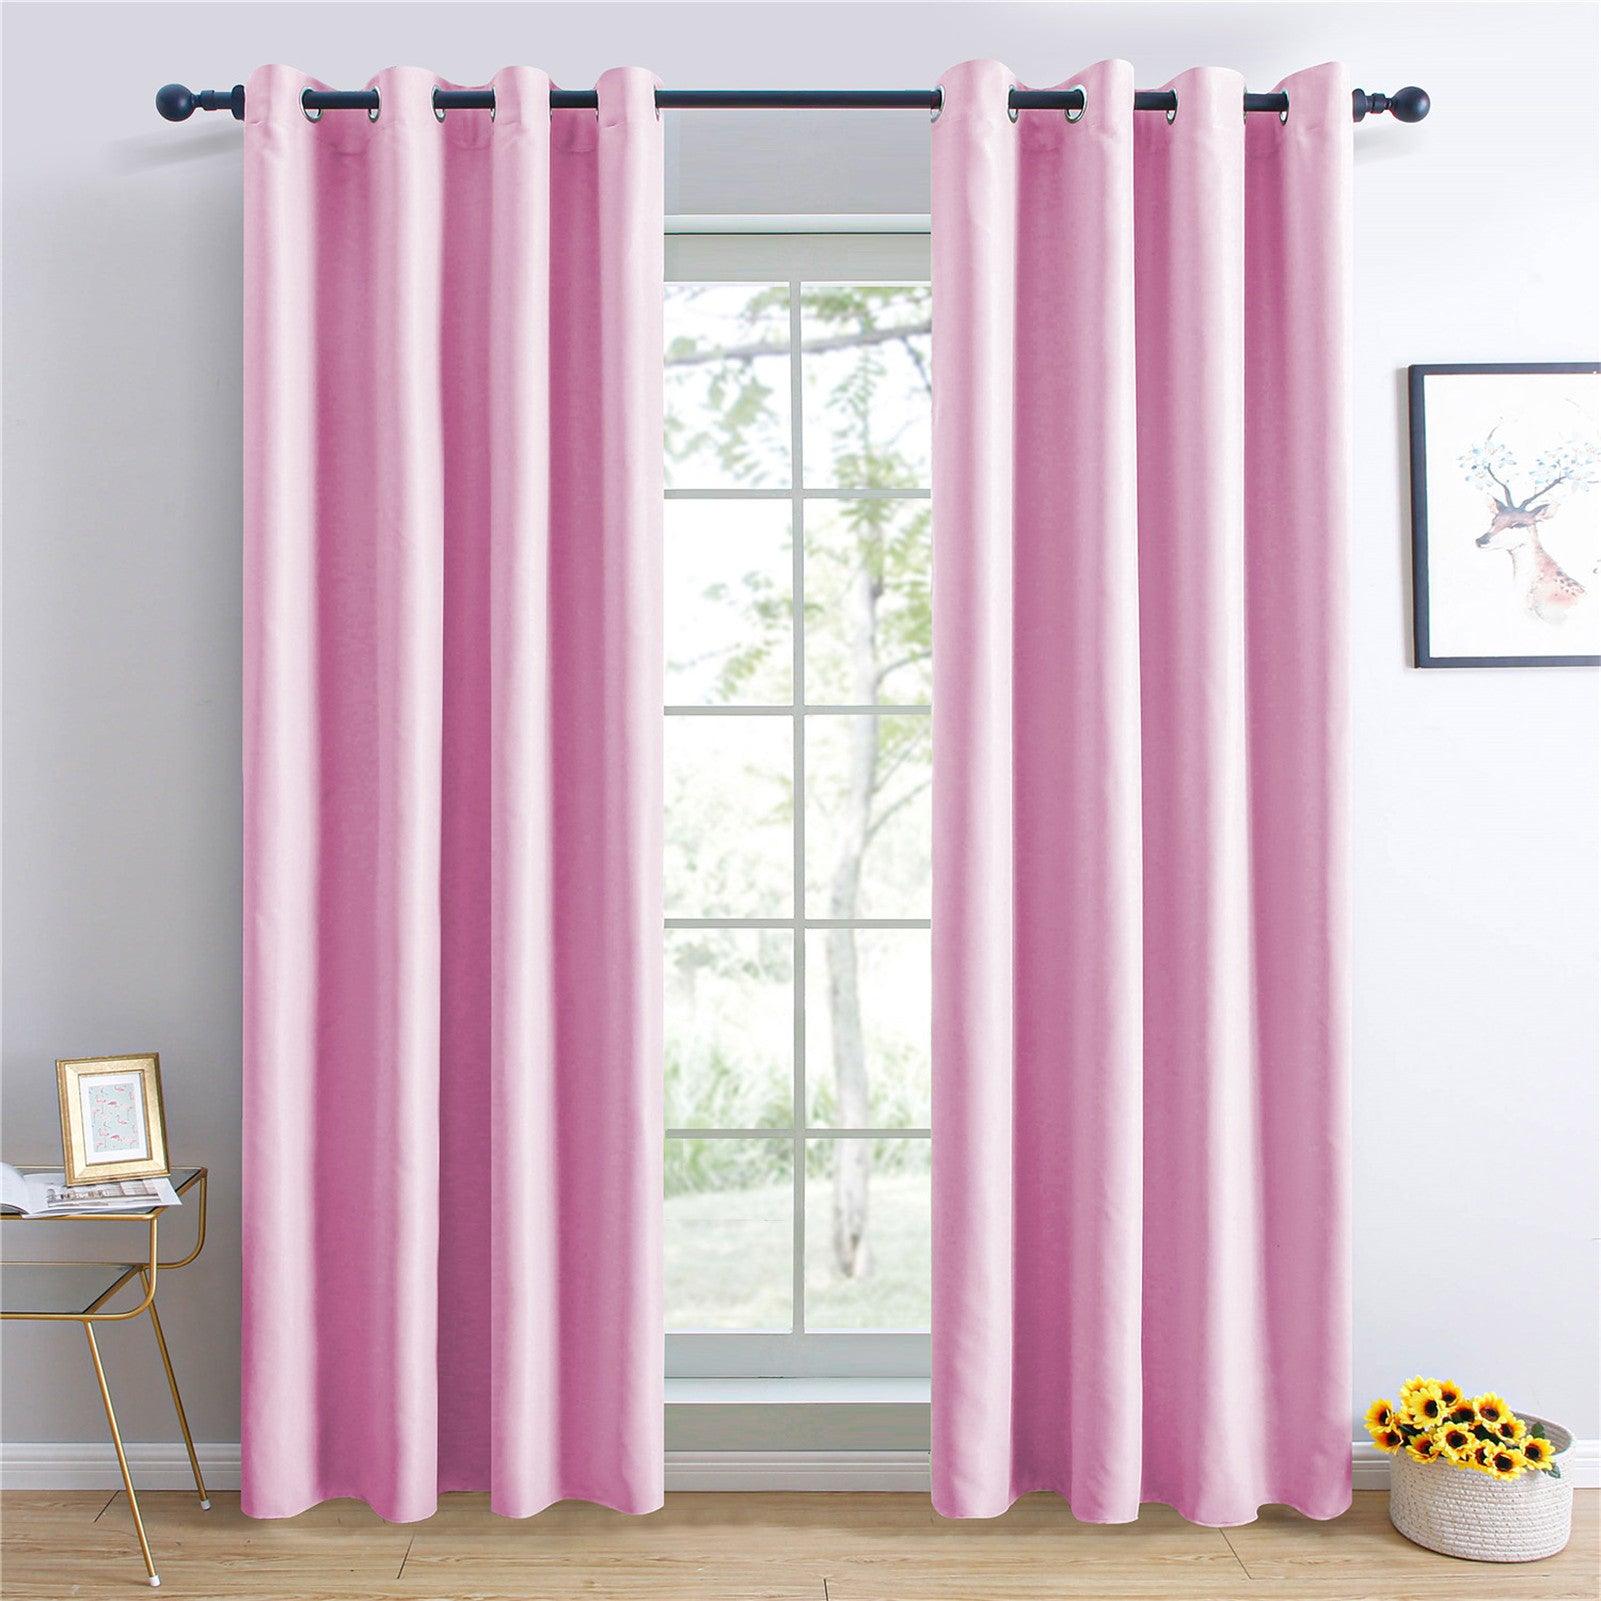 Topfinel Solid Color 100% blackout curtains for bedroom, sun zero blackout curtains - Topfinel